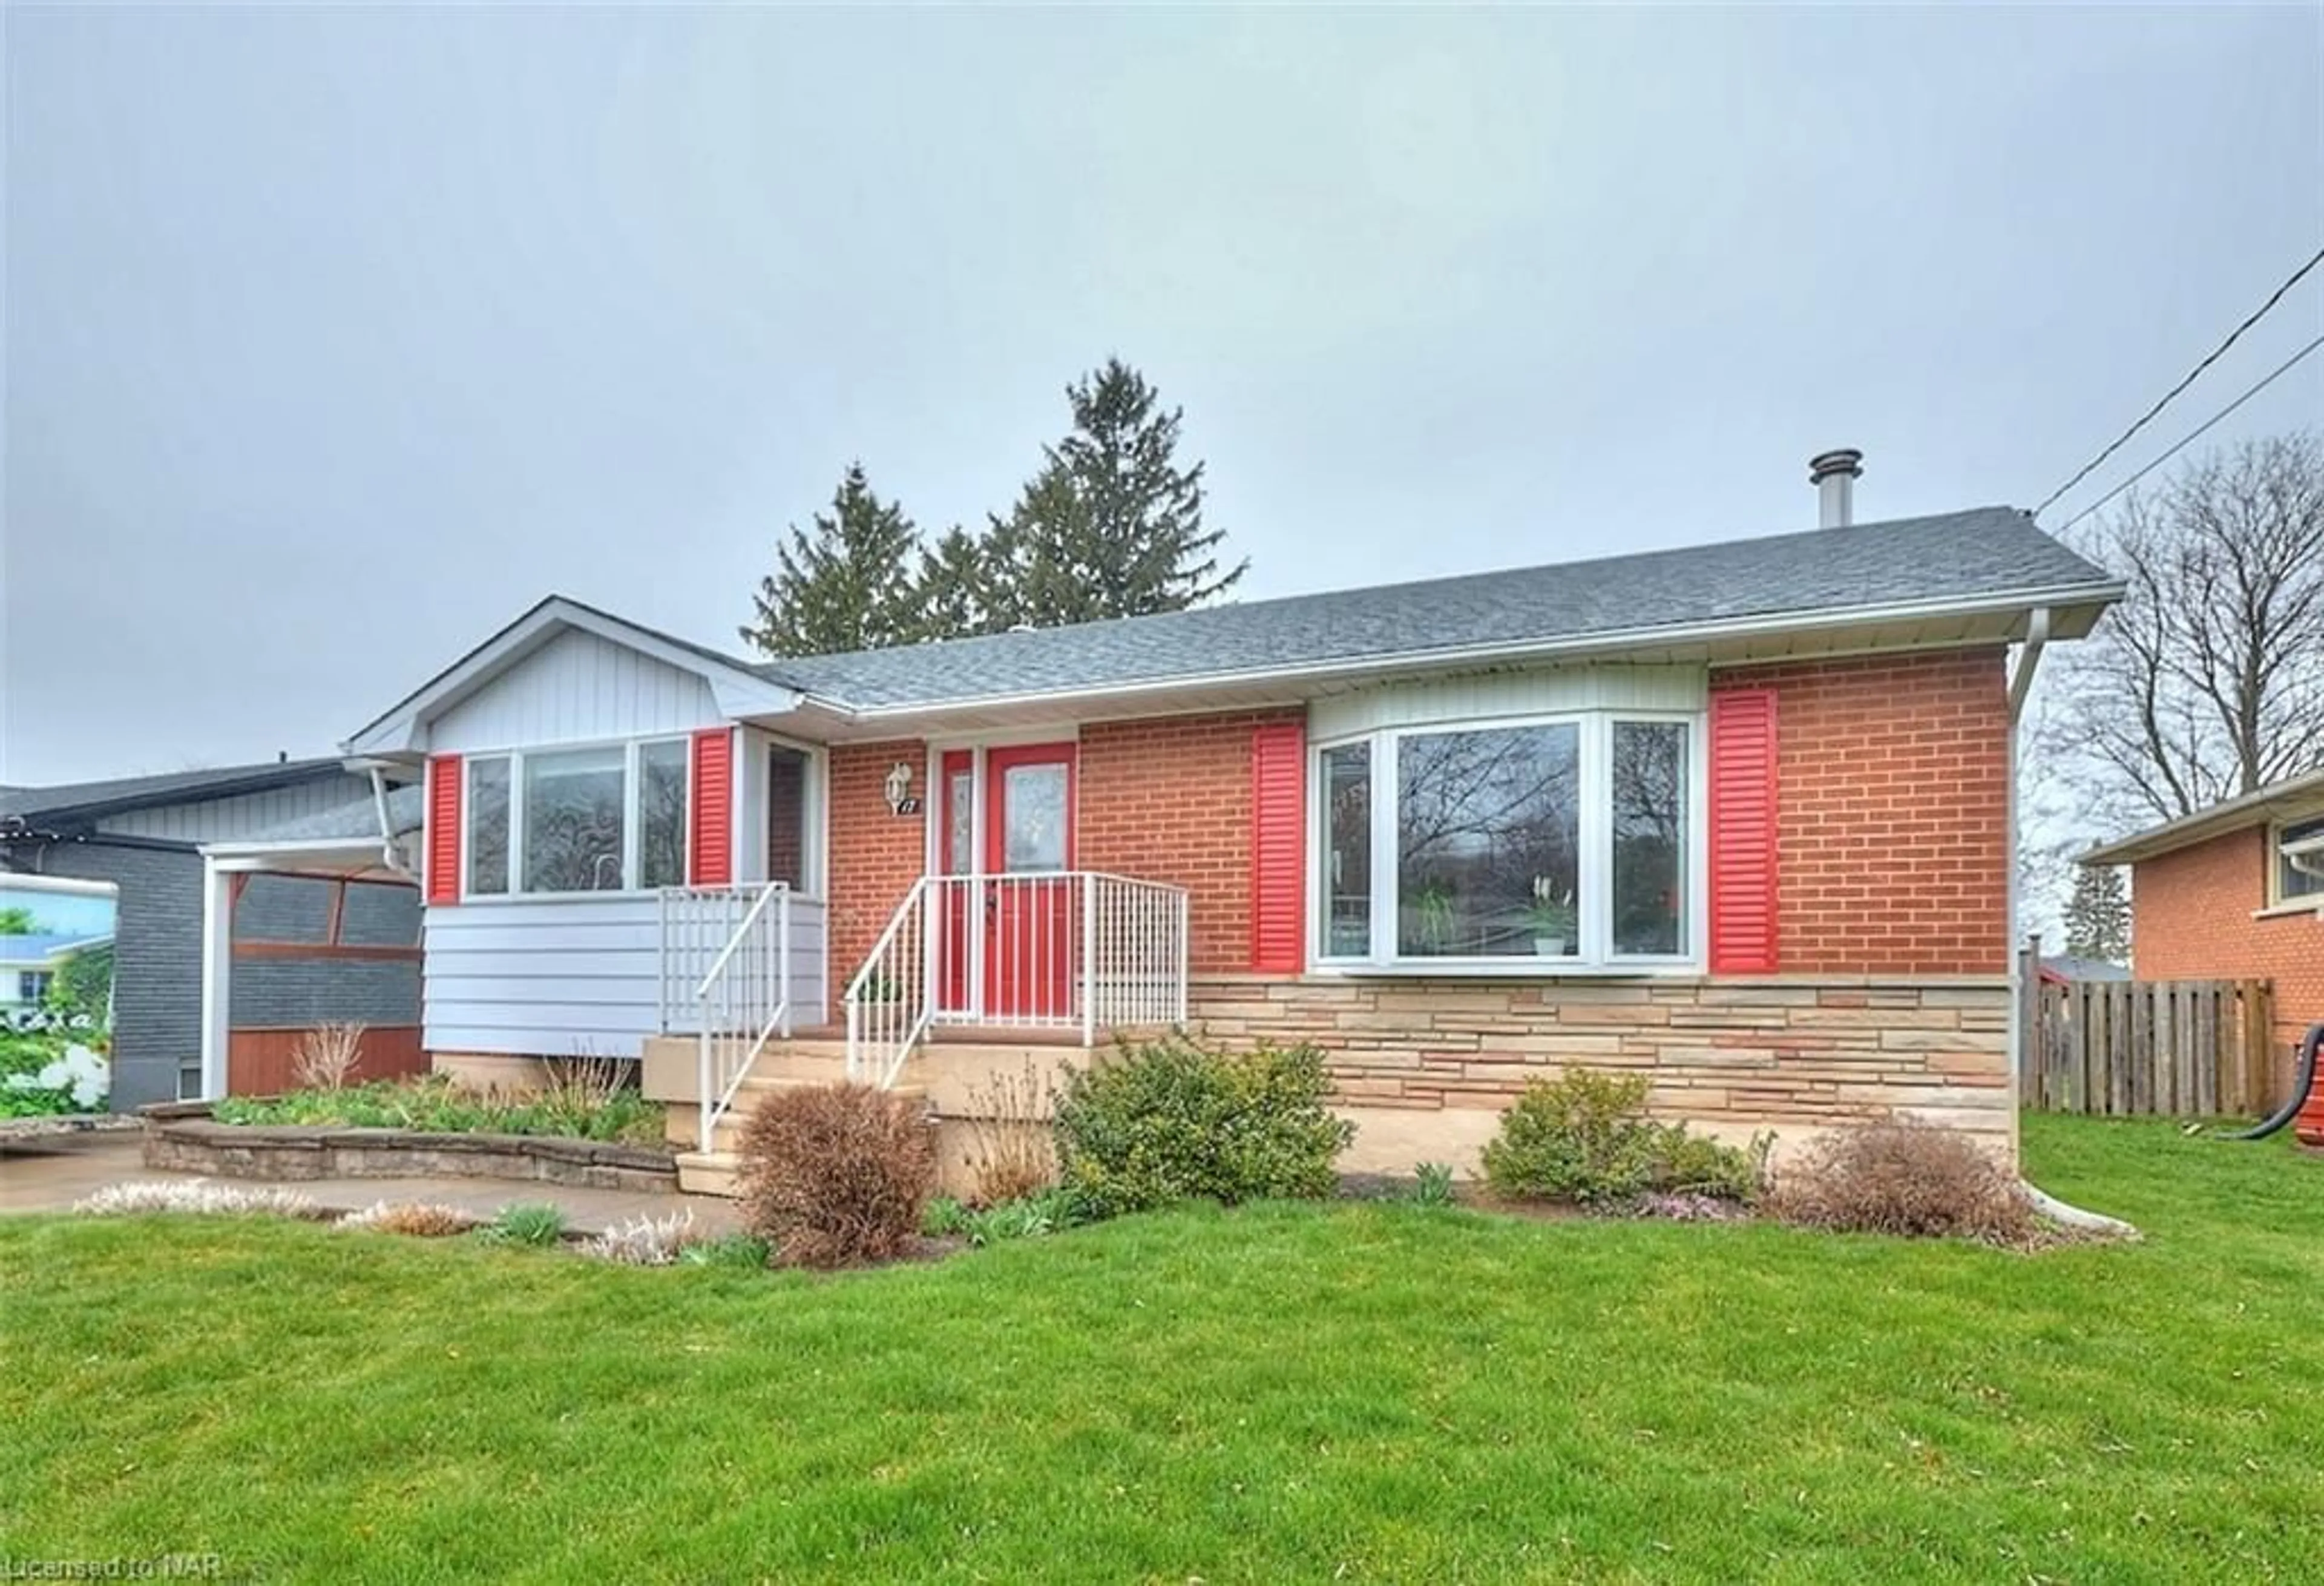 Home with brick exterior material for 17 Marilyn St, Grimsby Ontario L3M 1V3